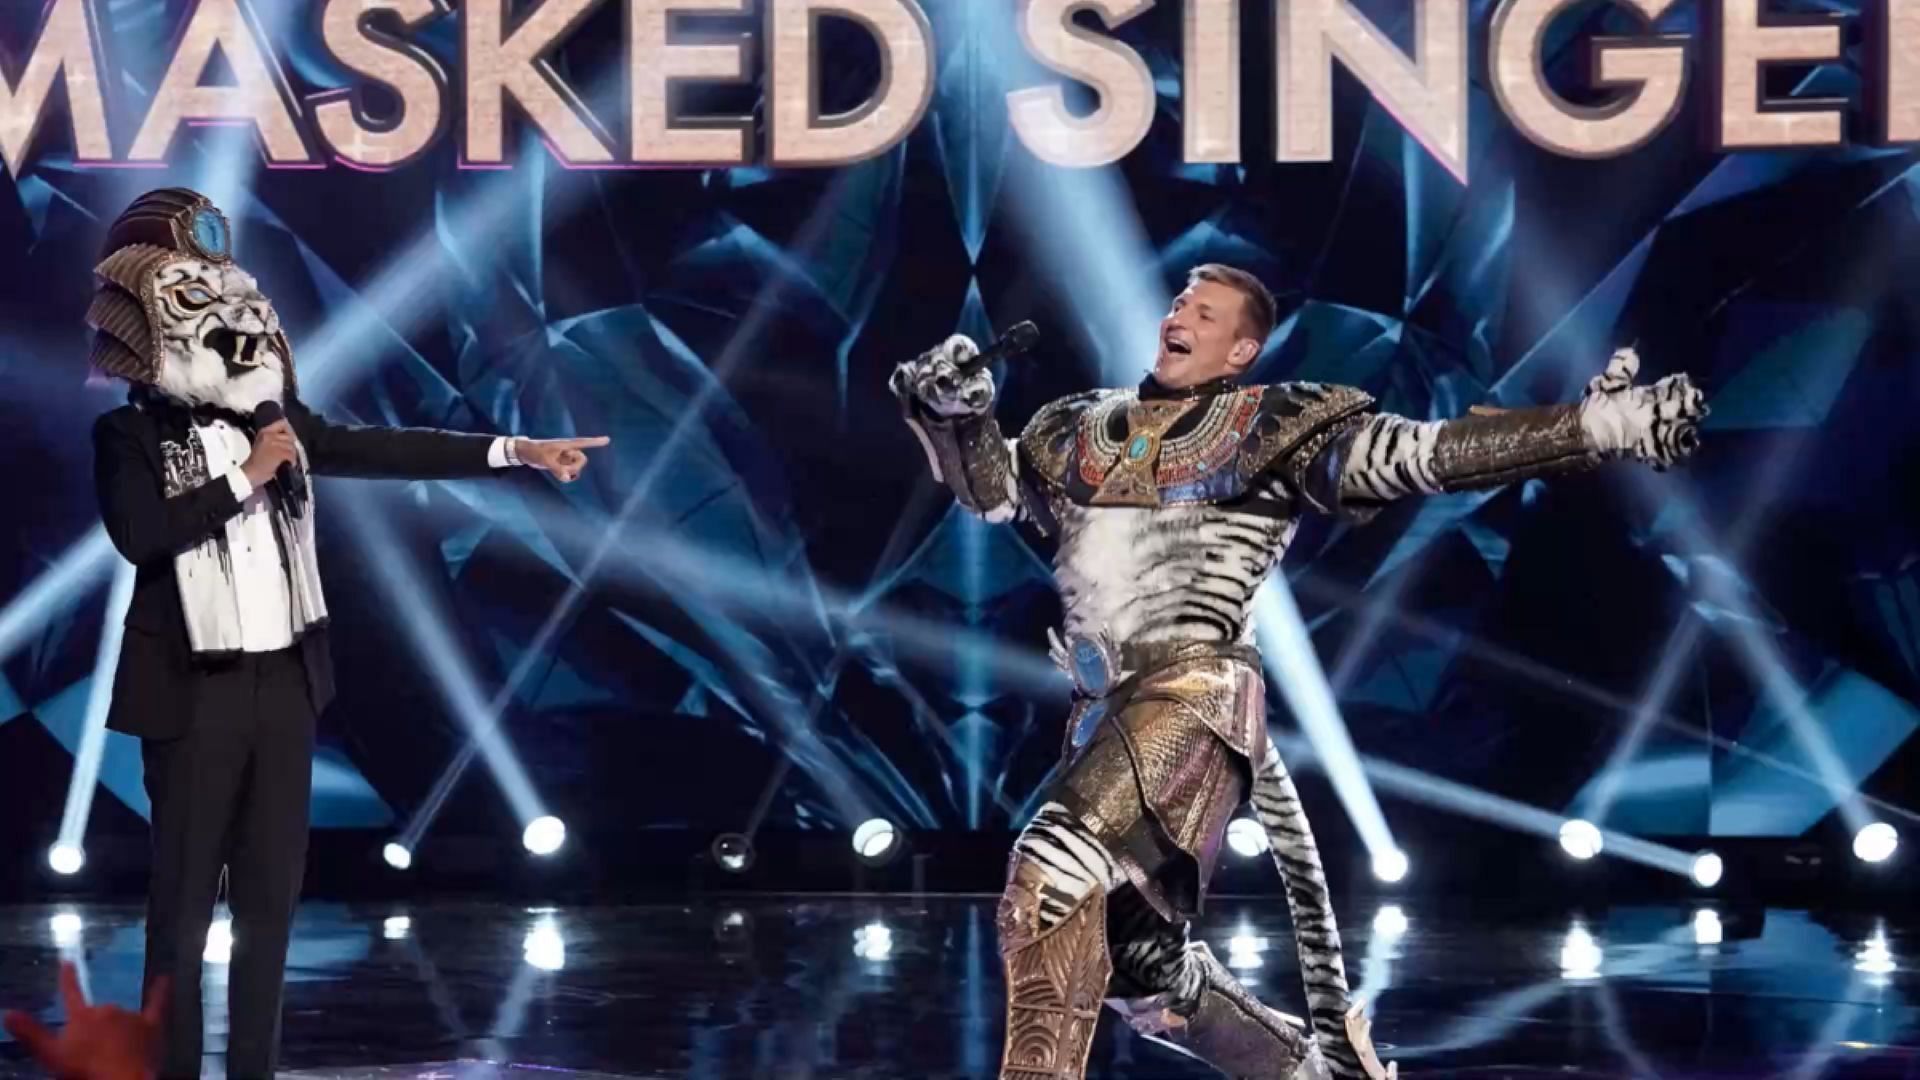 Former TB12 teammate Rob Gronkowski makes a surprise appearance on The Masked Singer